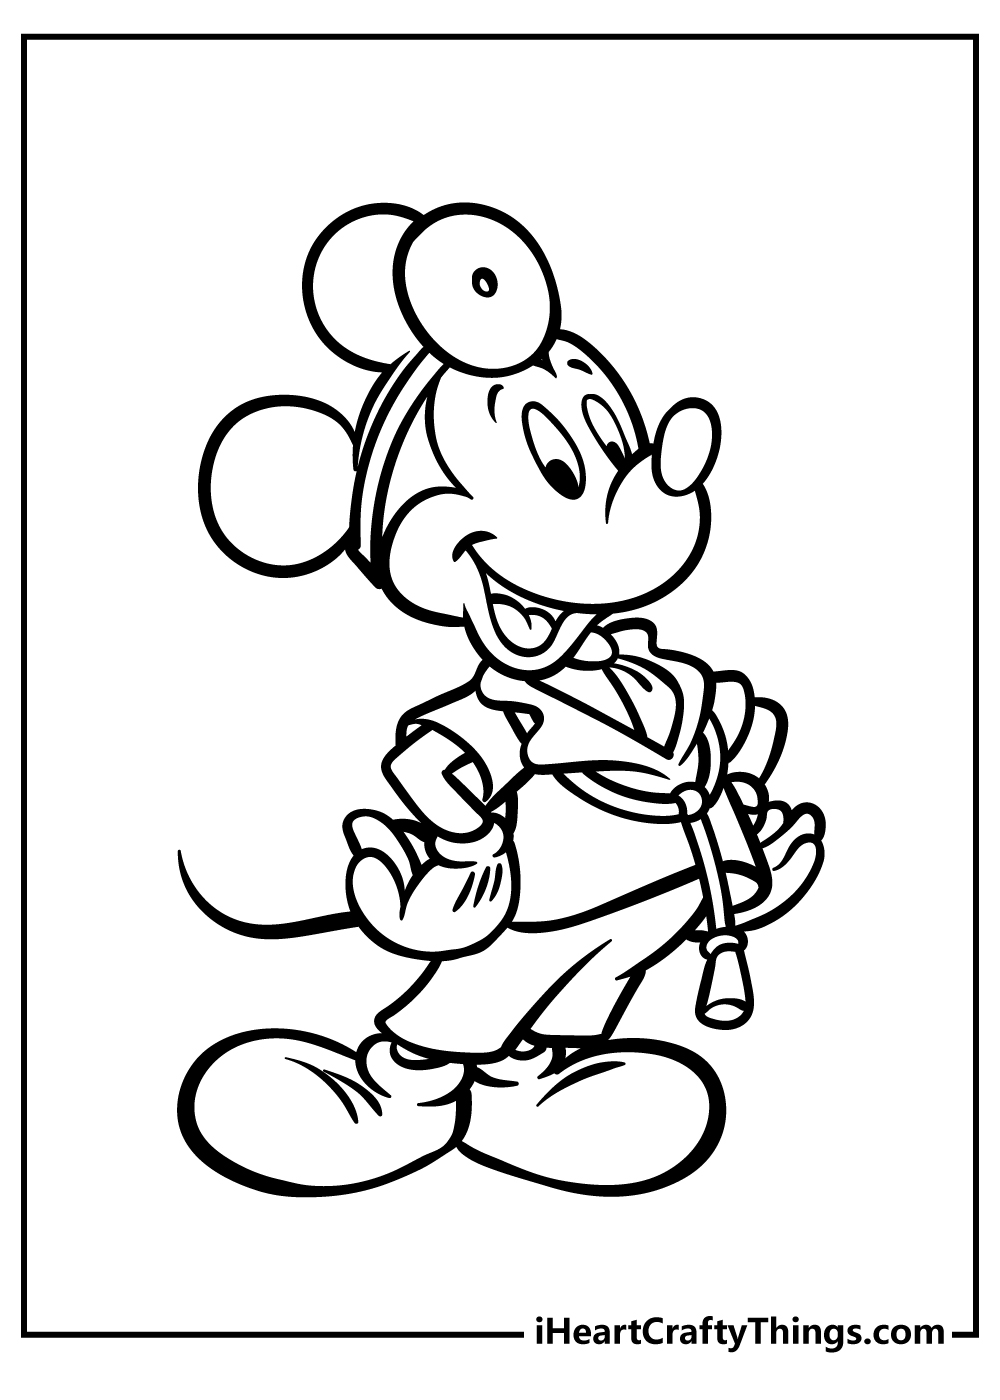 Mickey Mouse Coloring Pages free pdf download